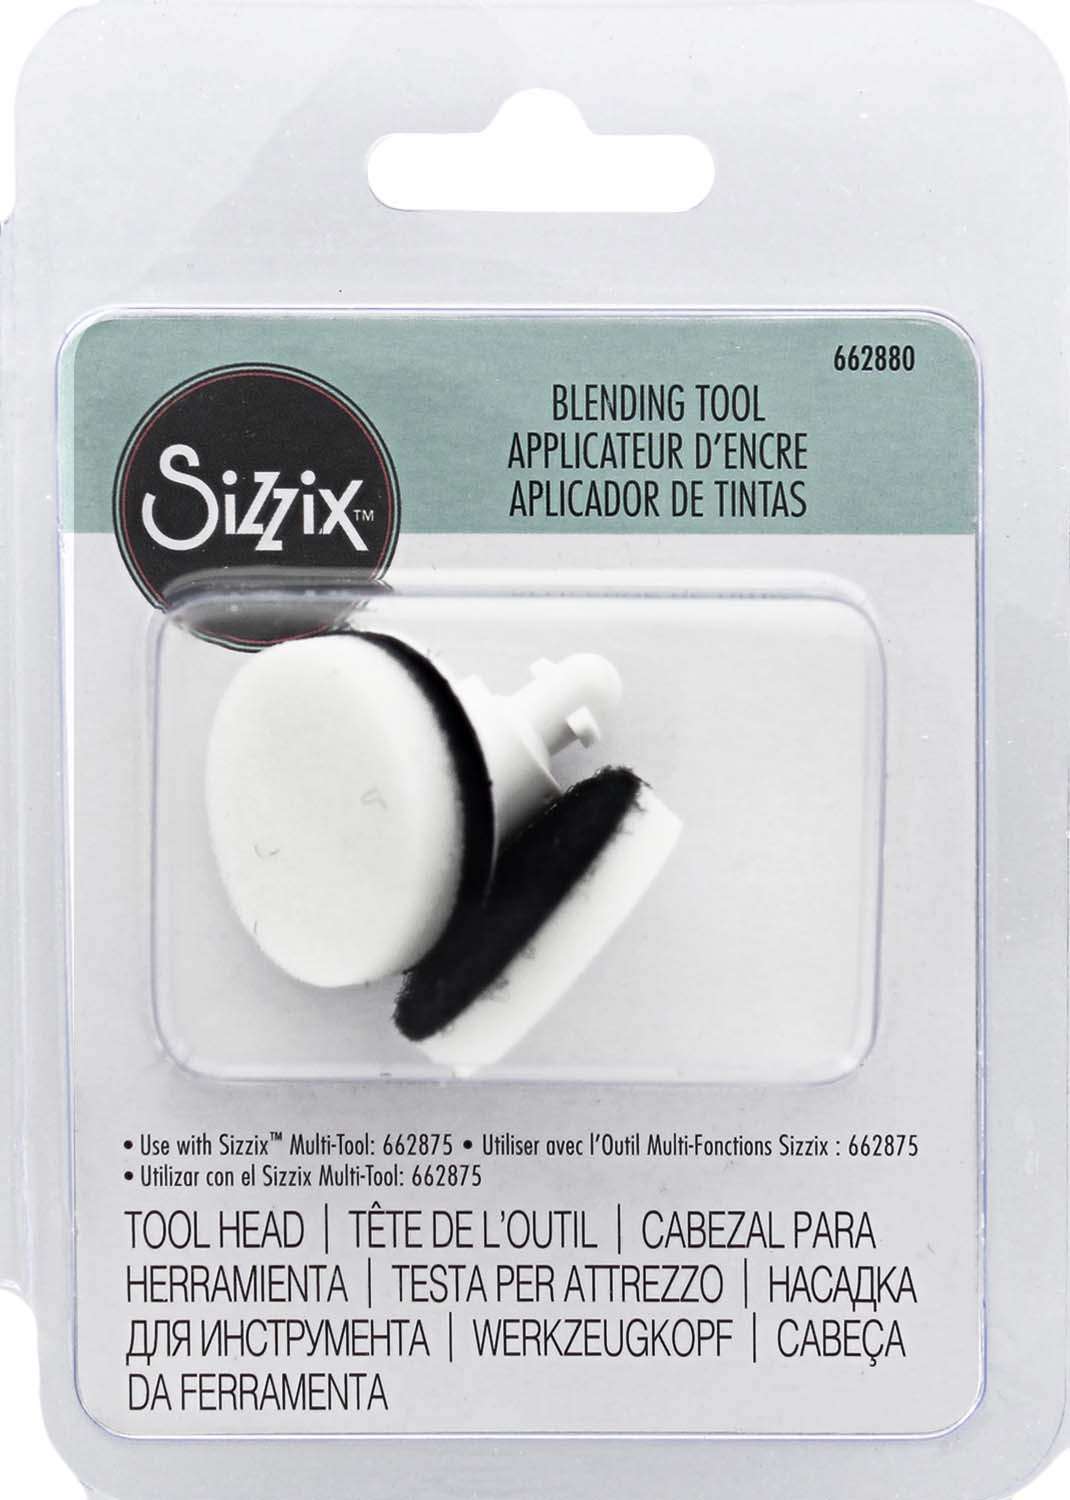 Sizzix Blending Tool Head with replacement sponges.